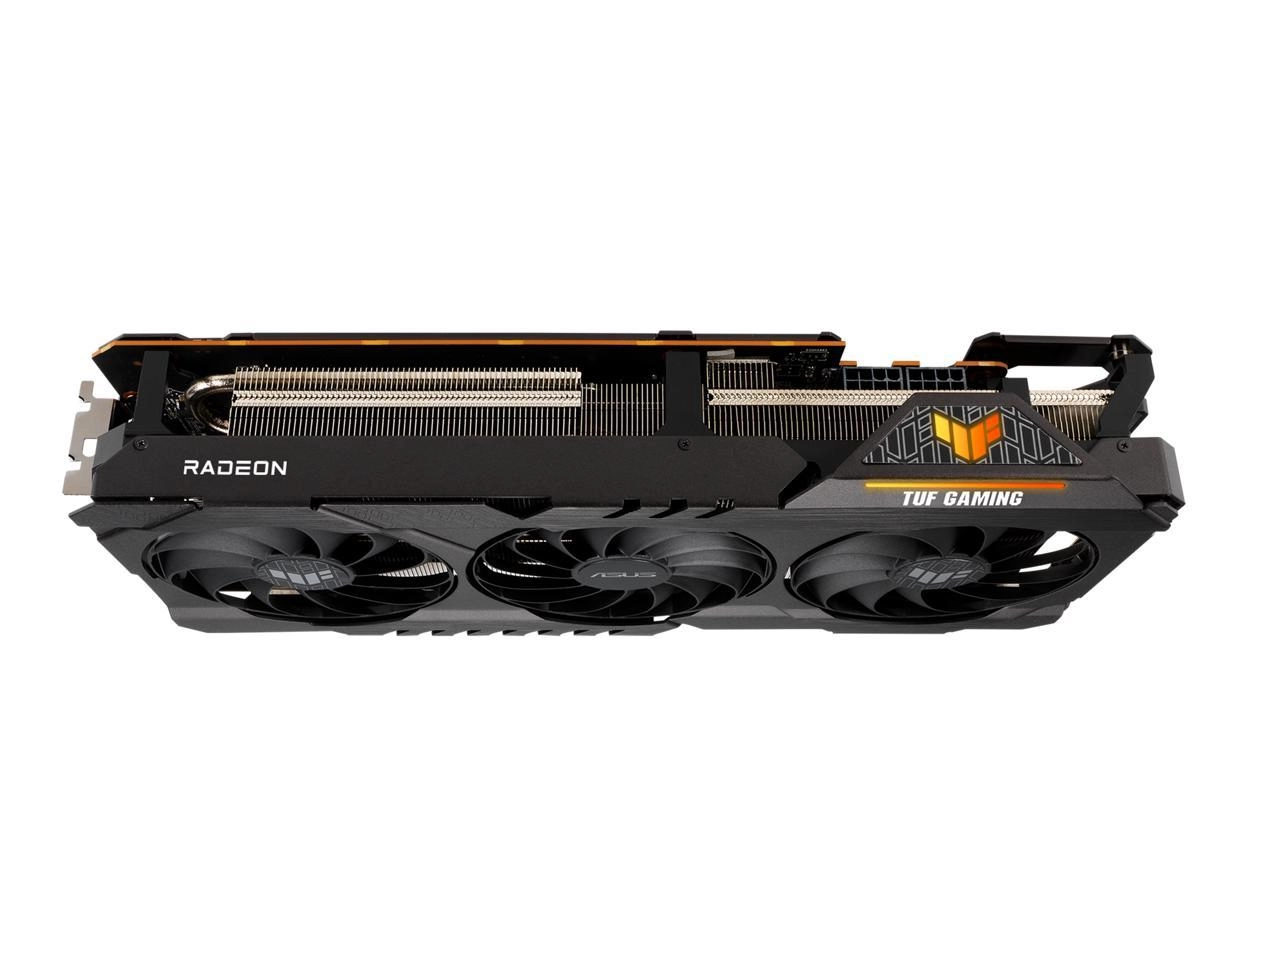 ASUS TUF GAMING Radeon RX 6800 XT OC Edition Front View